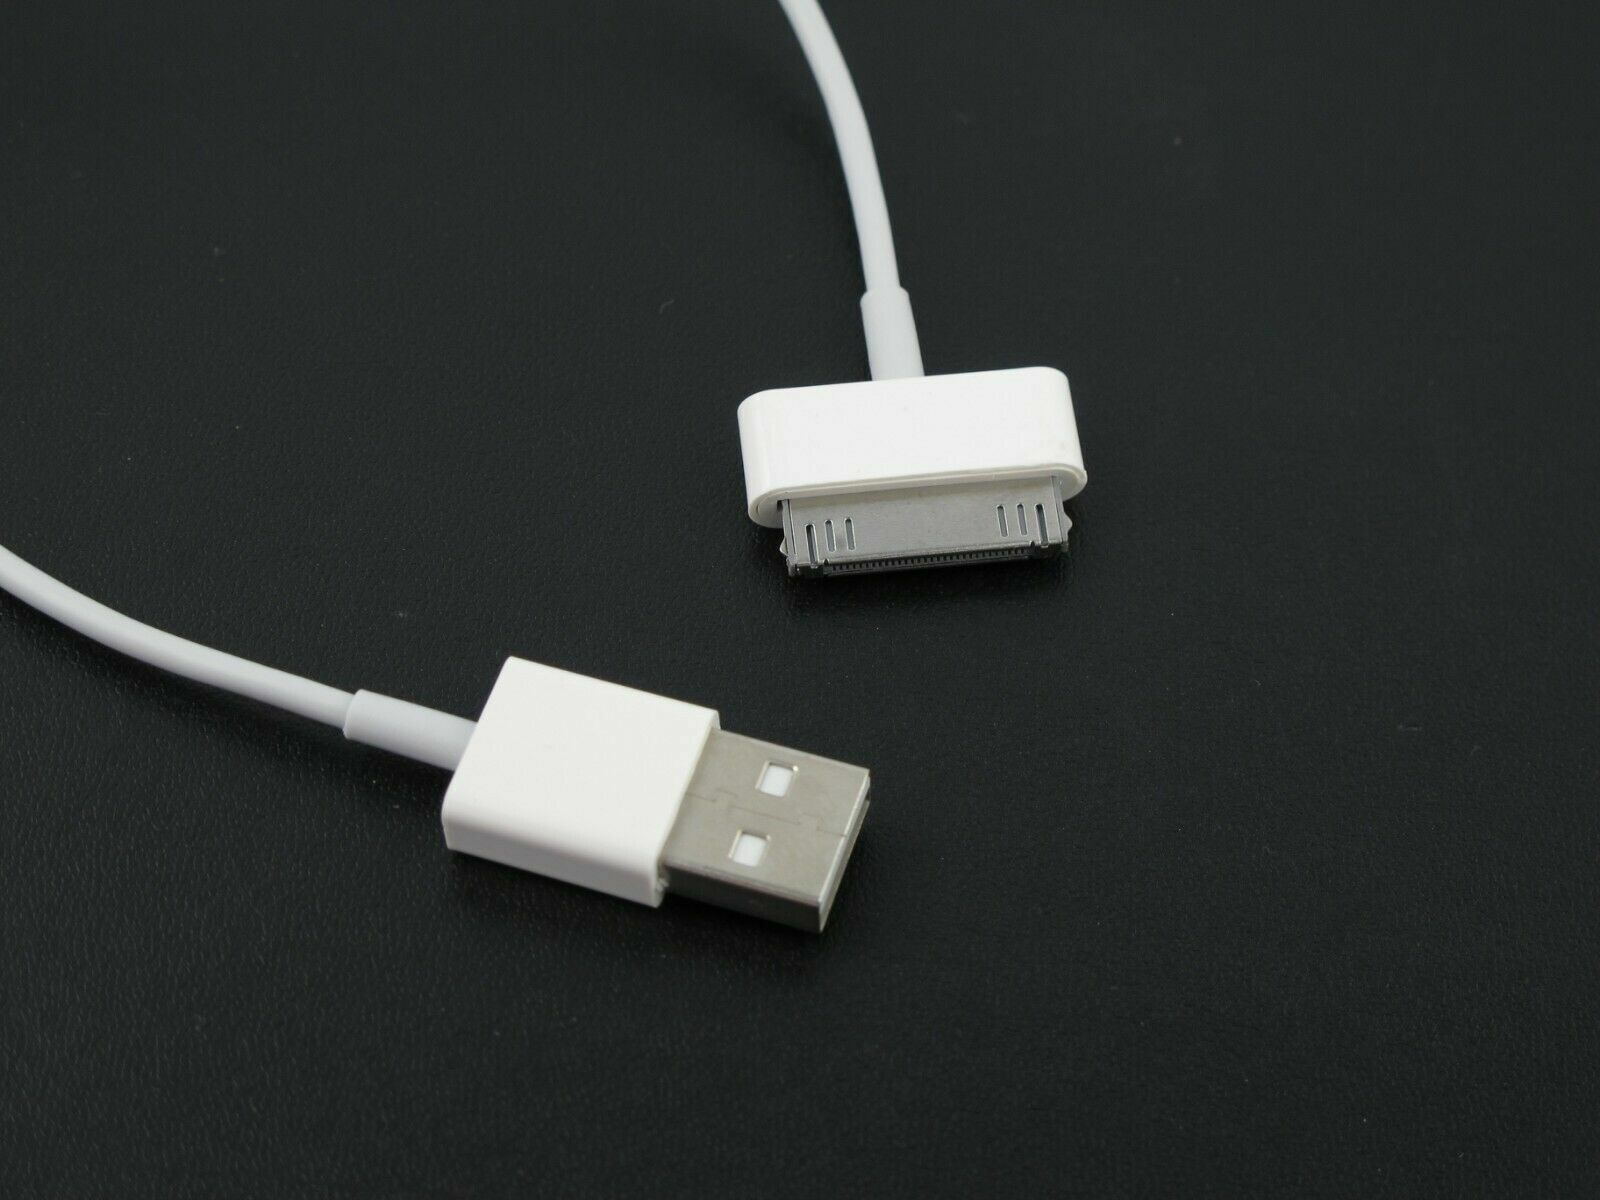 2 USB Charger Cable for Tablet Apple iPad 1 2 3 1st 2nd 3rd GEN Unbranded Does Not Apply - фотография #5